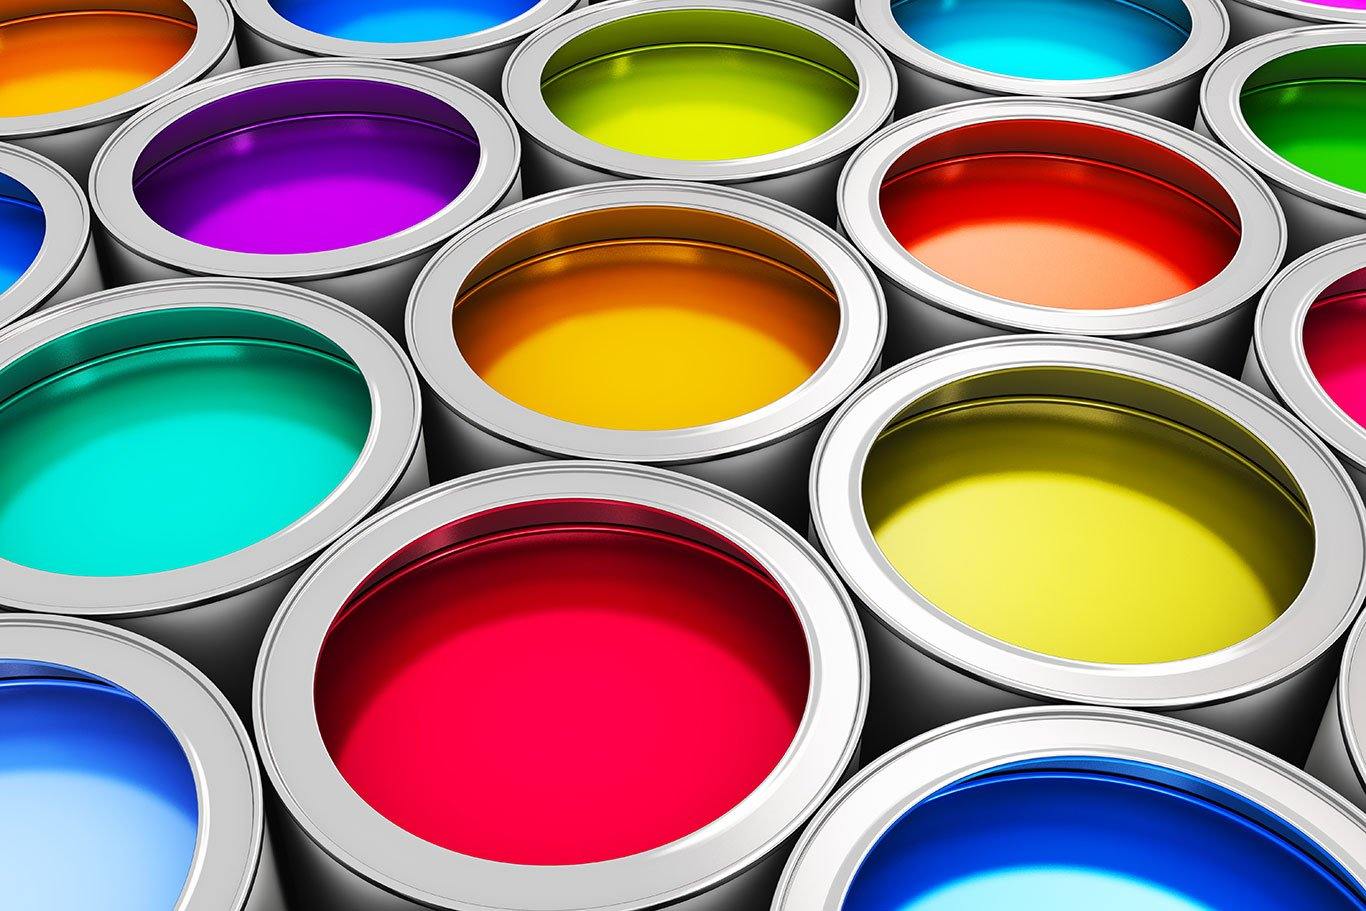 Paint Brand Wars, it's a thing! But not for us and here's why....